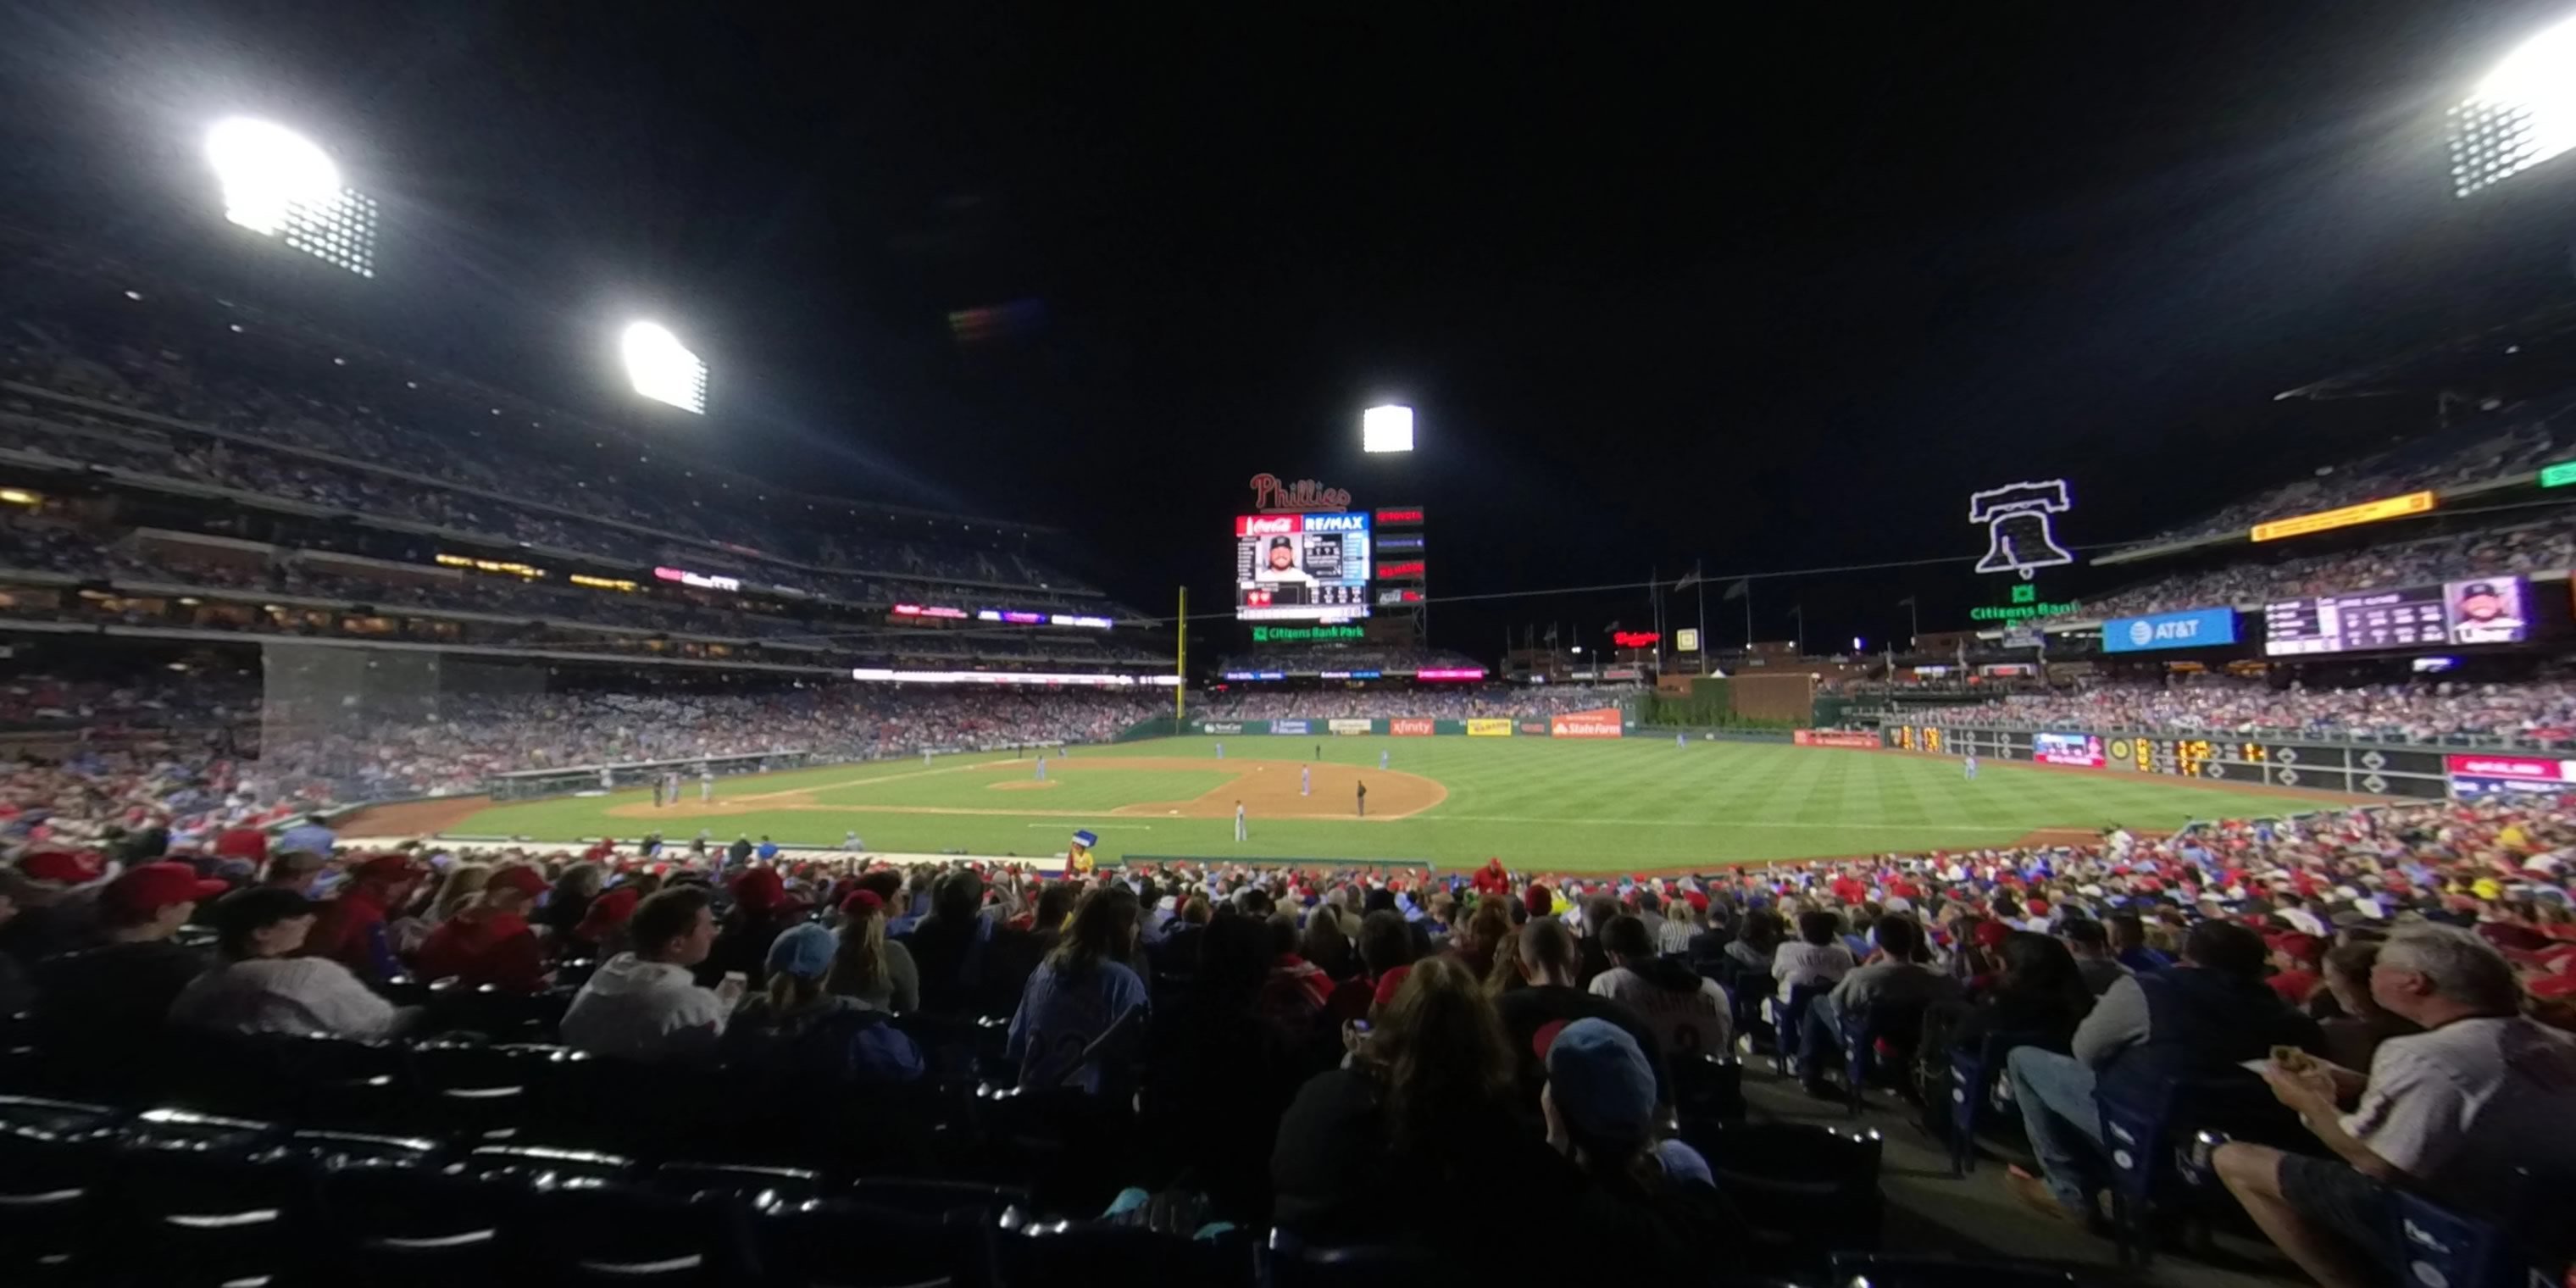 section 114 panoramic seat view  for baseball - citizens bank park